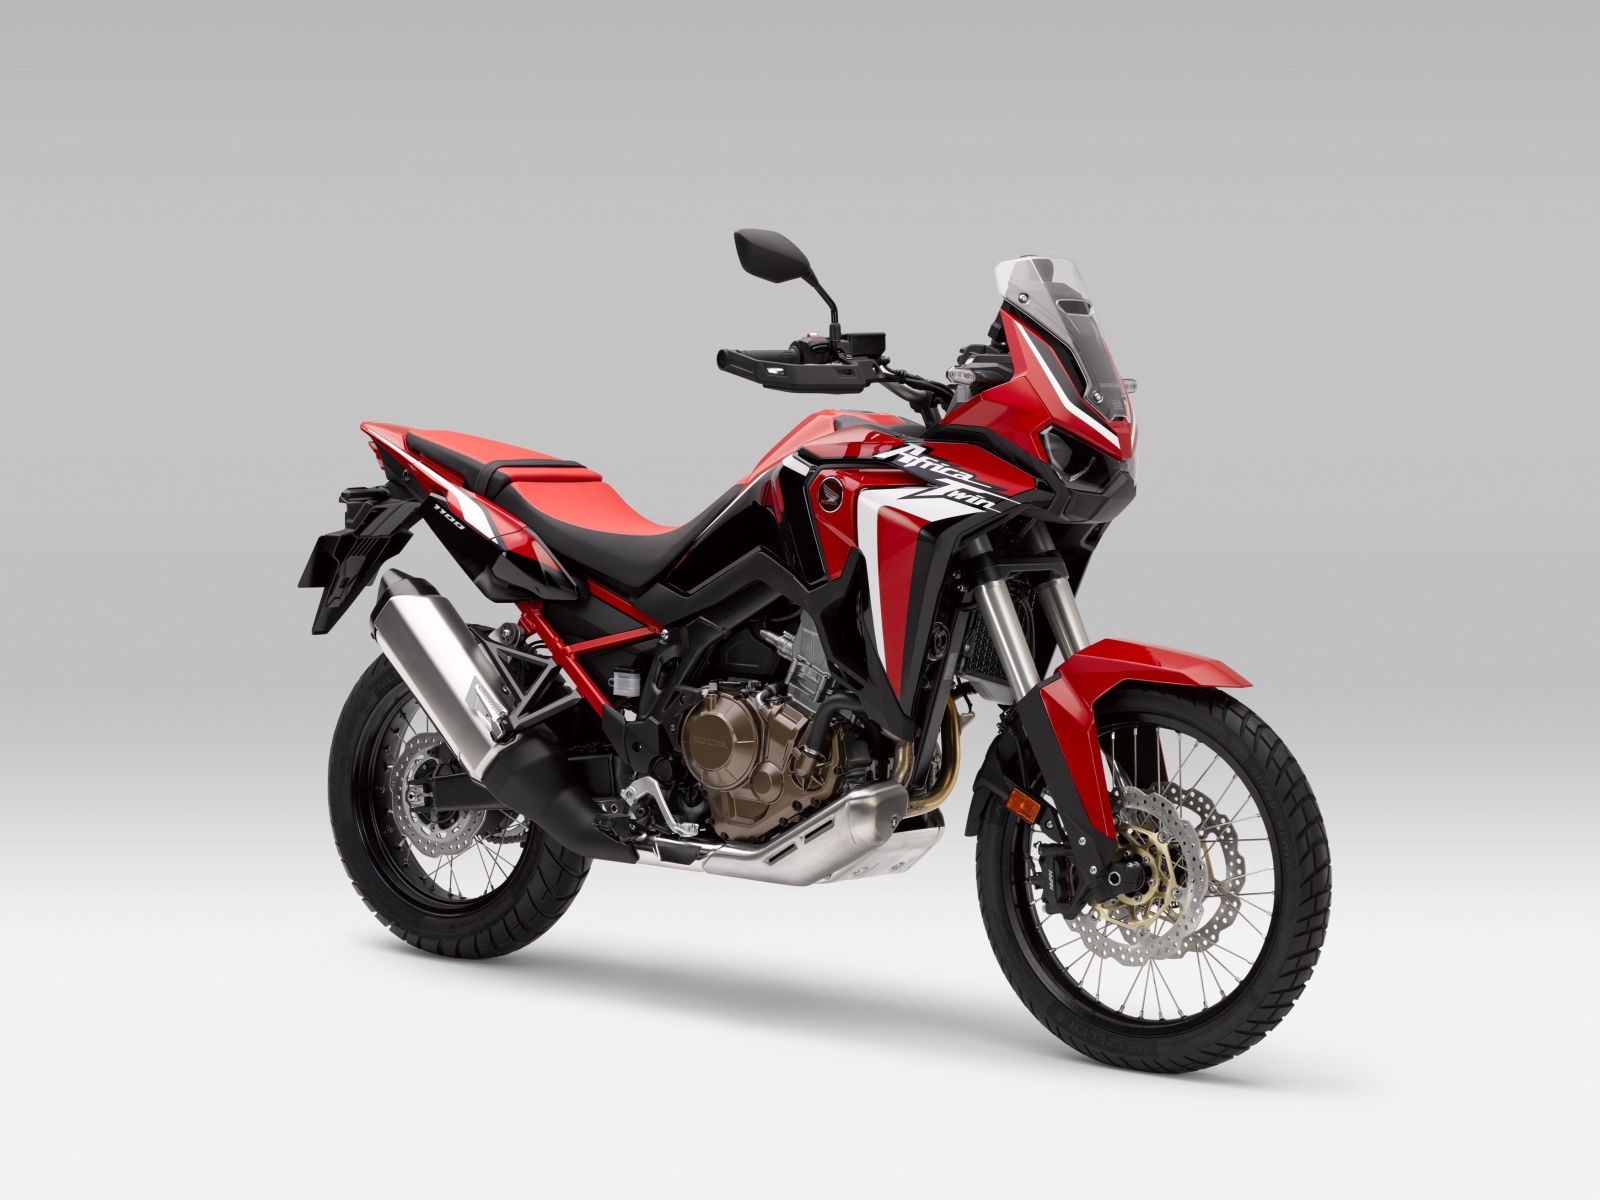 Motorcycle Honda CRF 1000 D, 2020 on a gray background